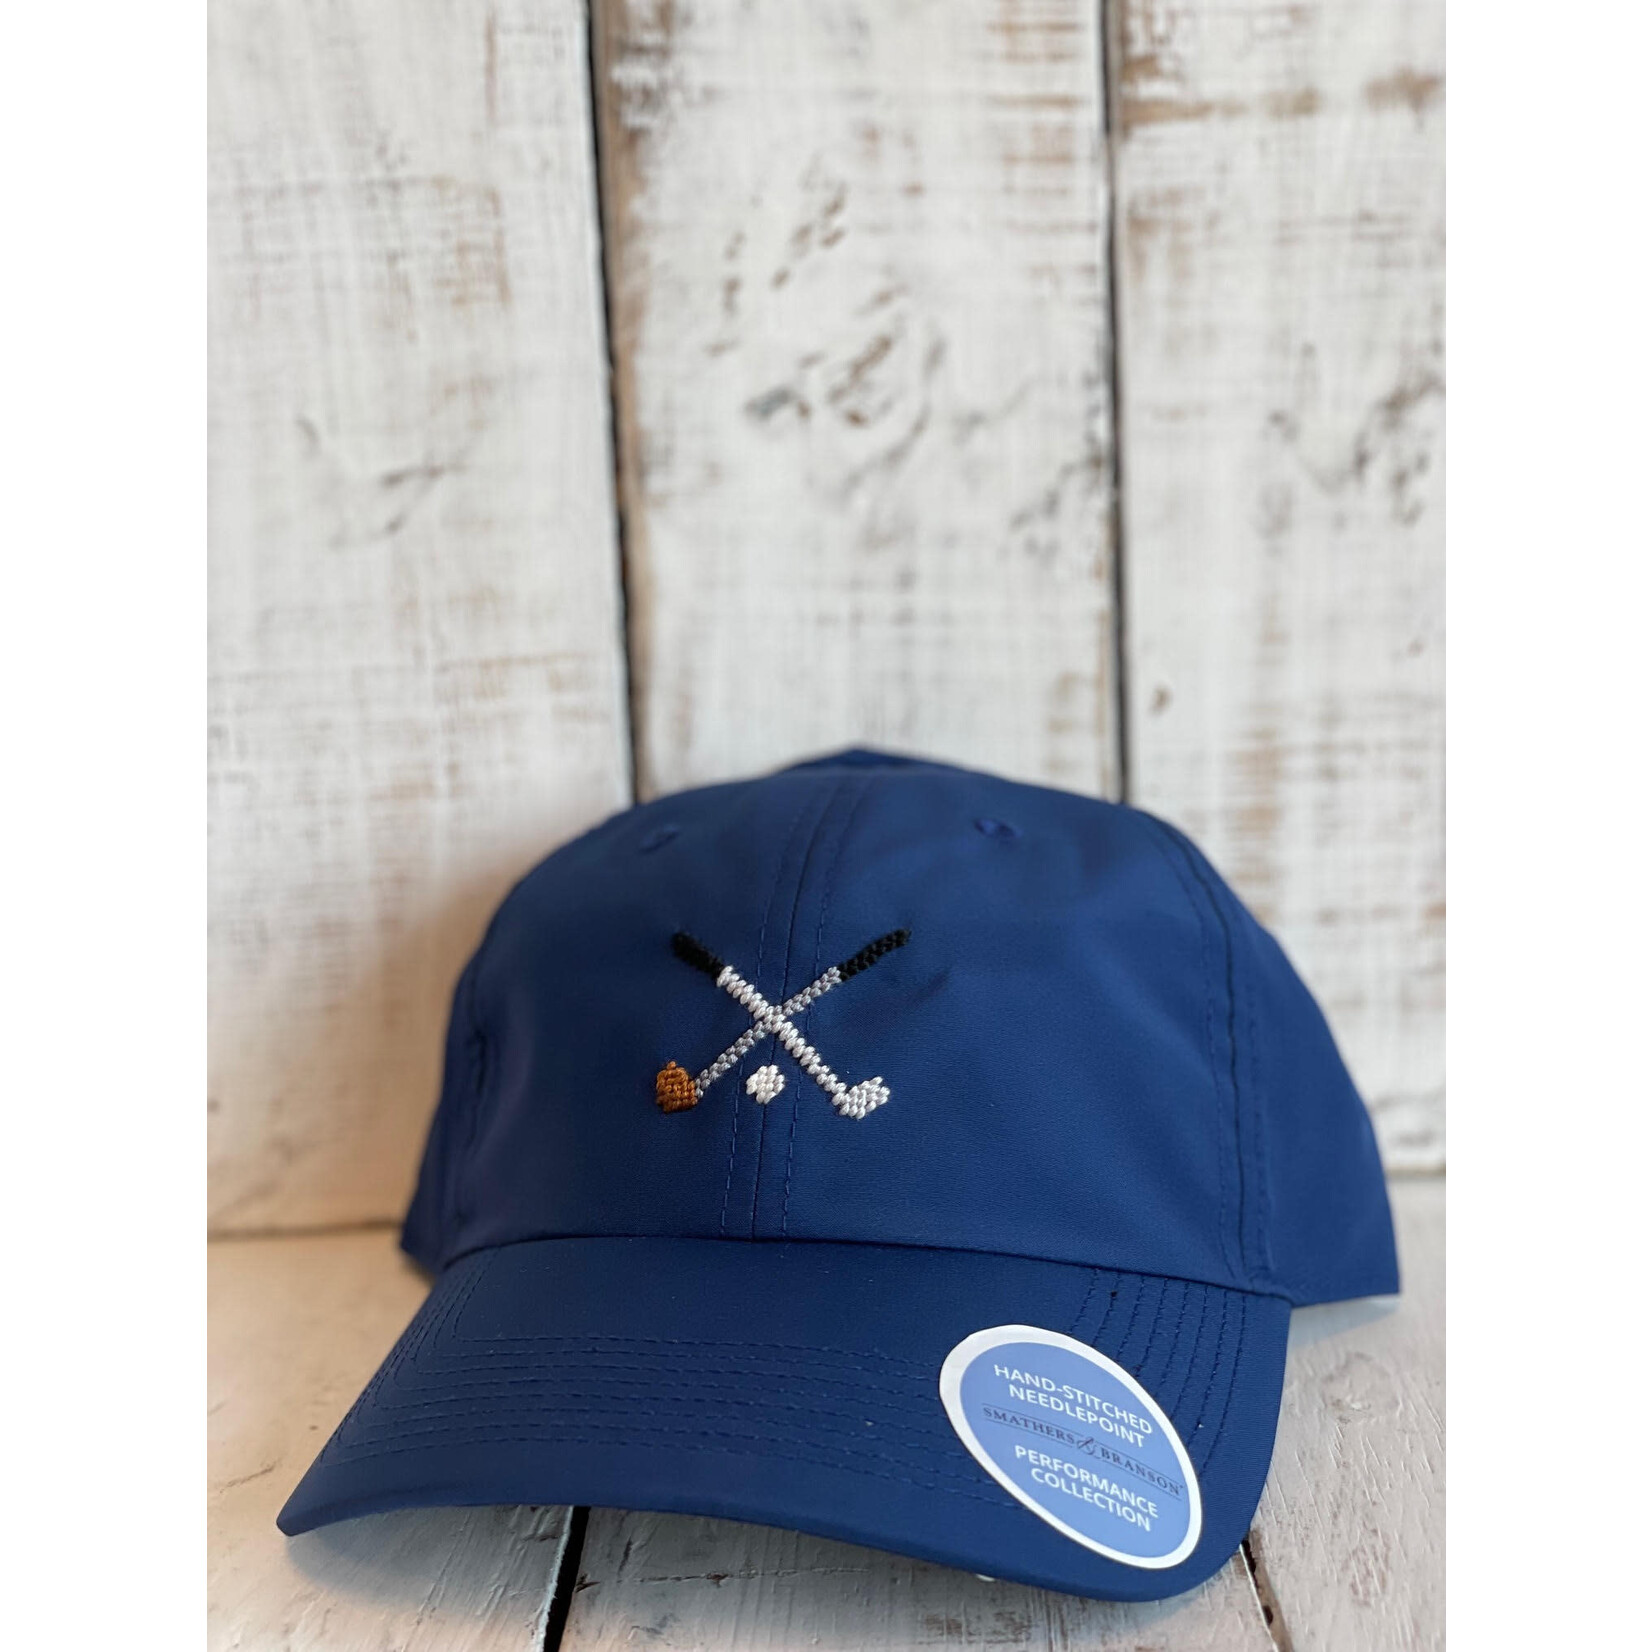 Smathers and Branson Crossed Clubs Performance Hat Navy